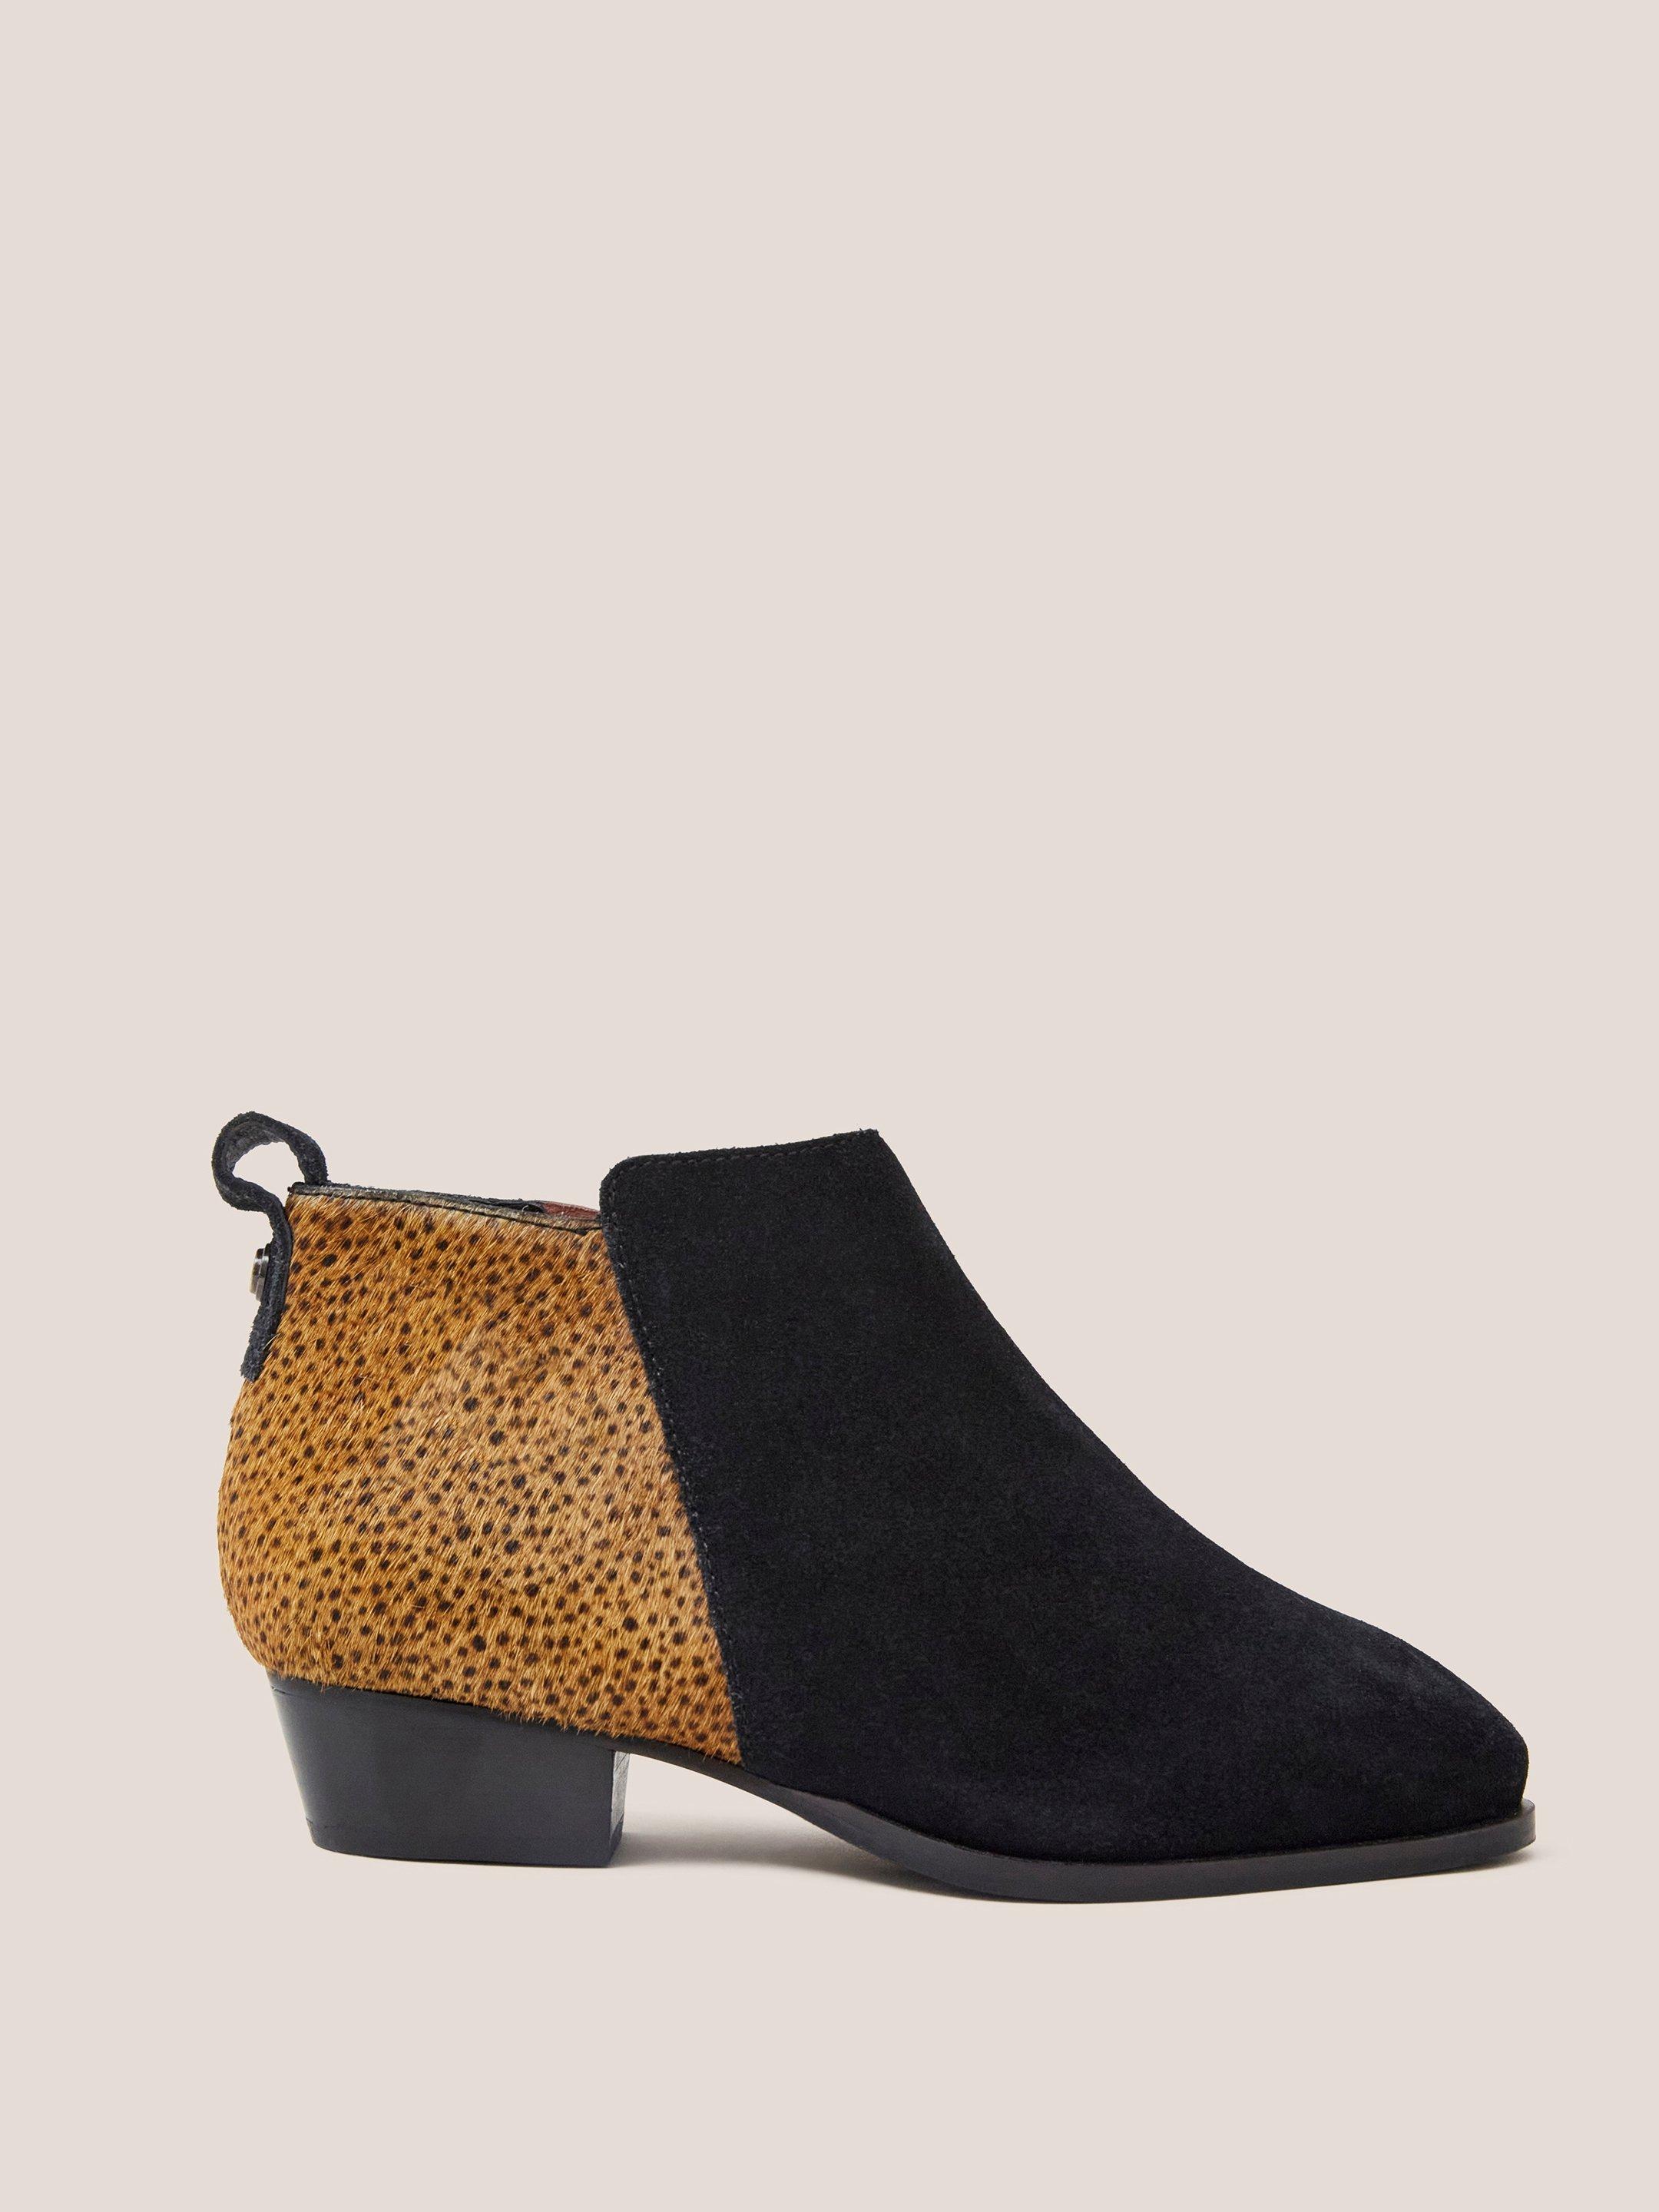 Wide Fit Suede Pony Ankle Boot in BLK PR - MODEL FRONT